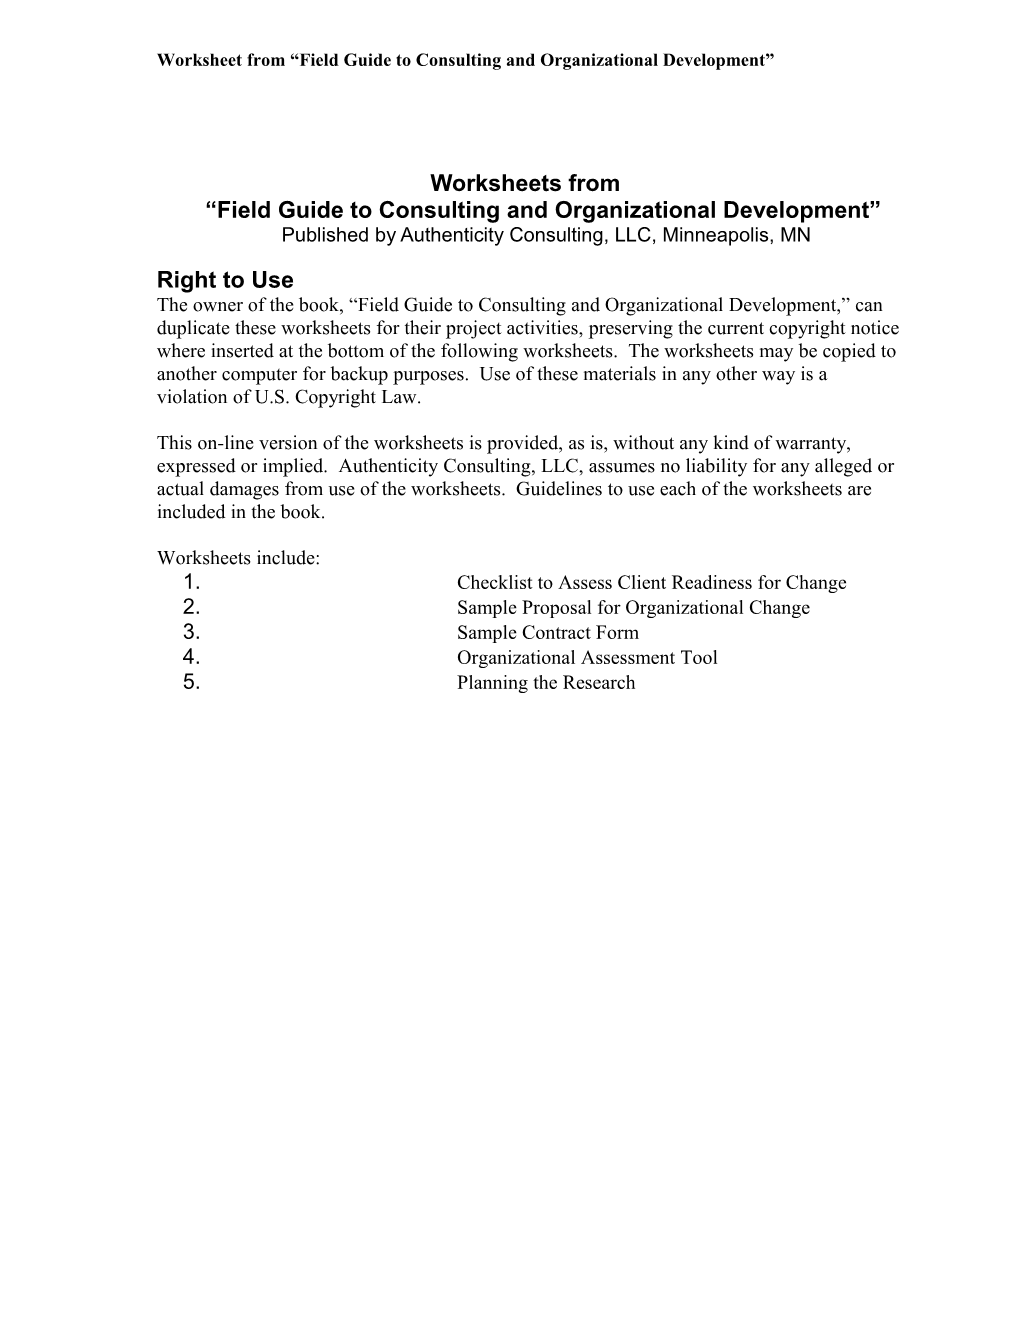 Worksheets from Field Guide to Consulting and Organizational Development